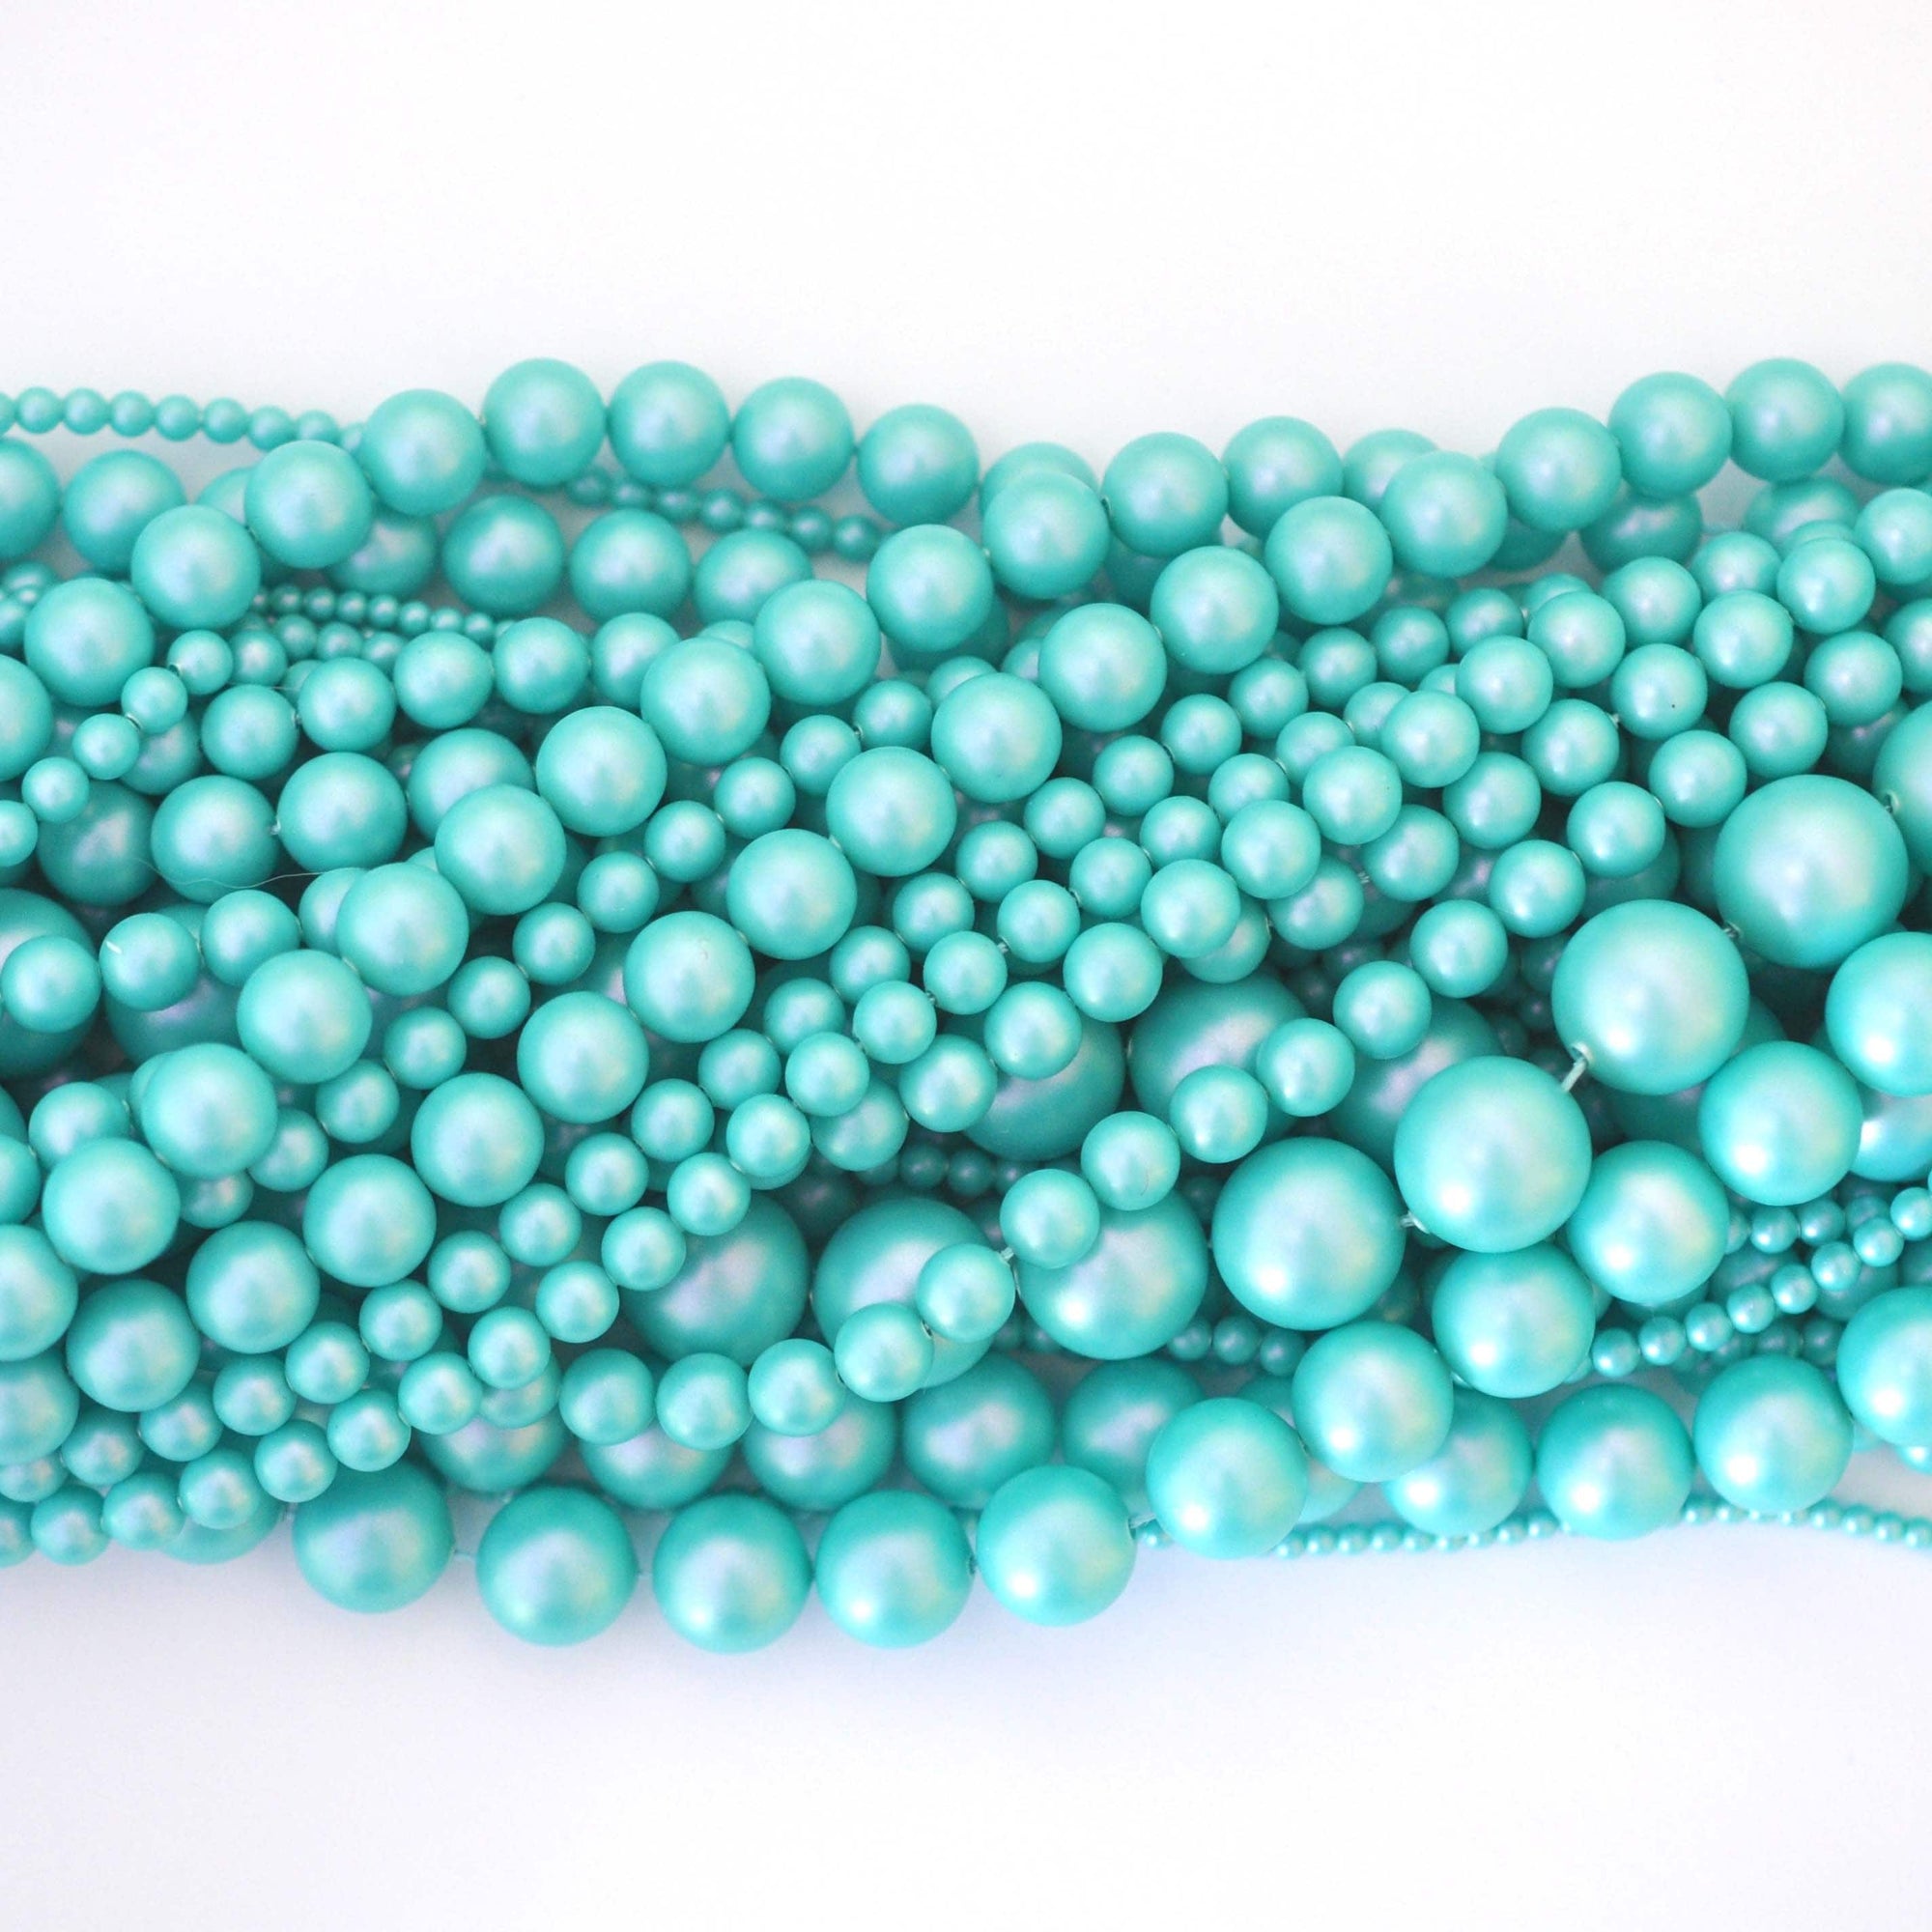 Iridescent Light Turquoise 5810 Barton Crystal Round Pearl Beads 12mm